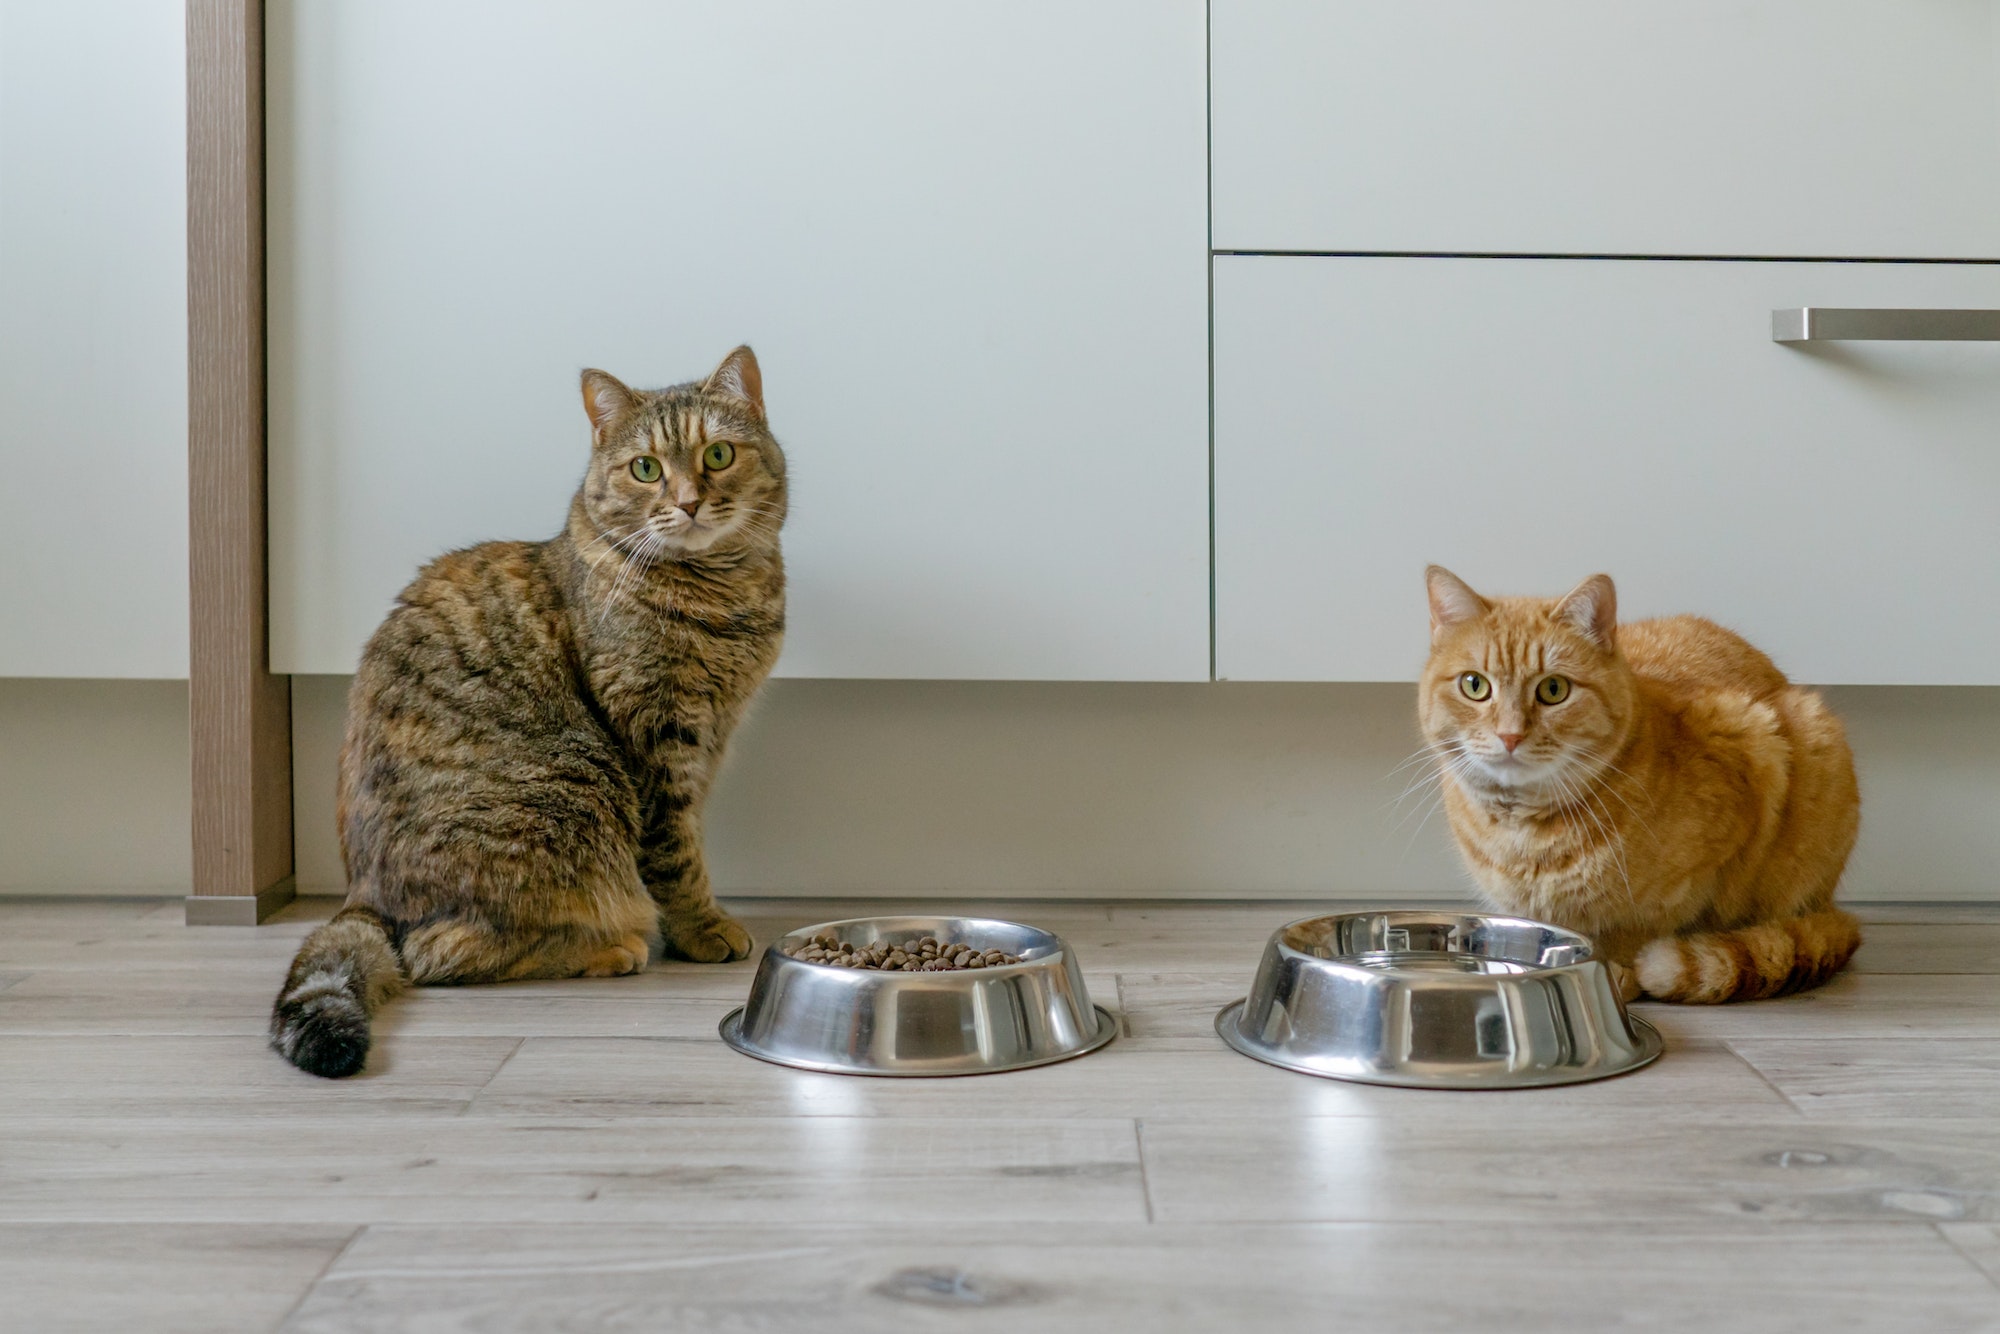 Two beautiful cats in the kitchen near bowls of dry cat food. Cats look at the camera.